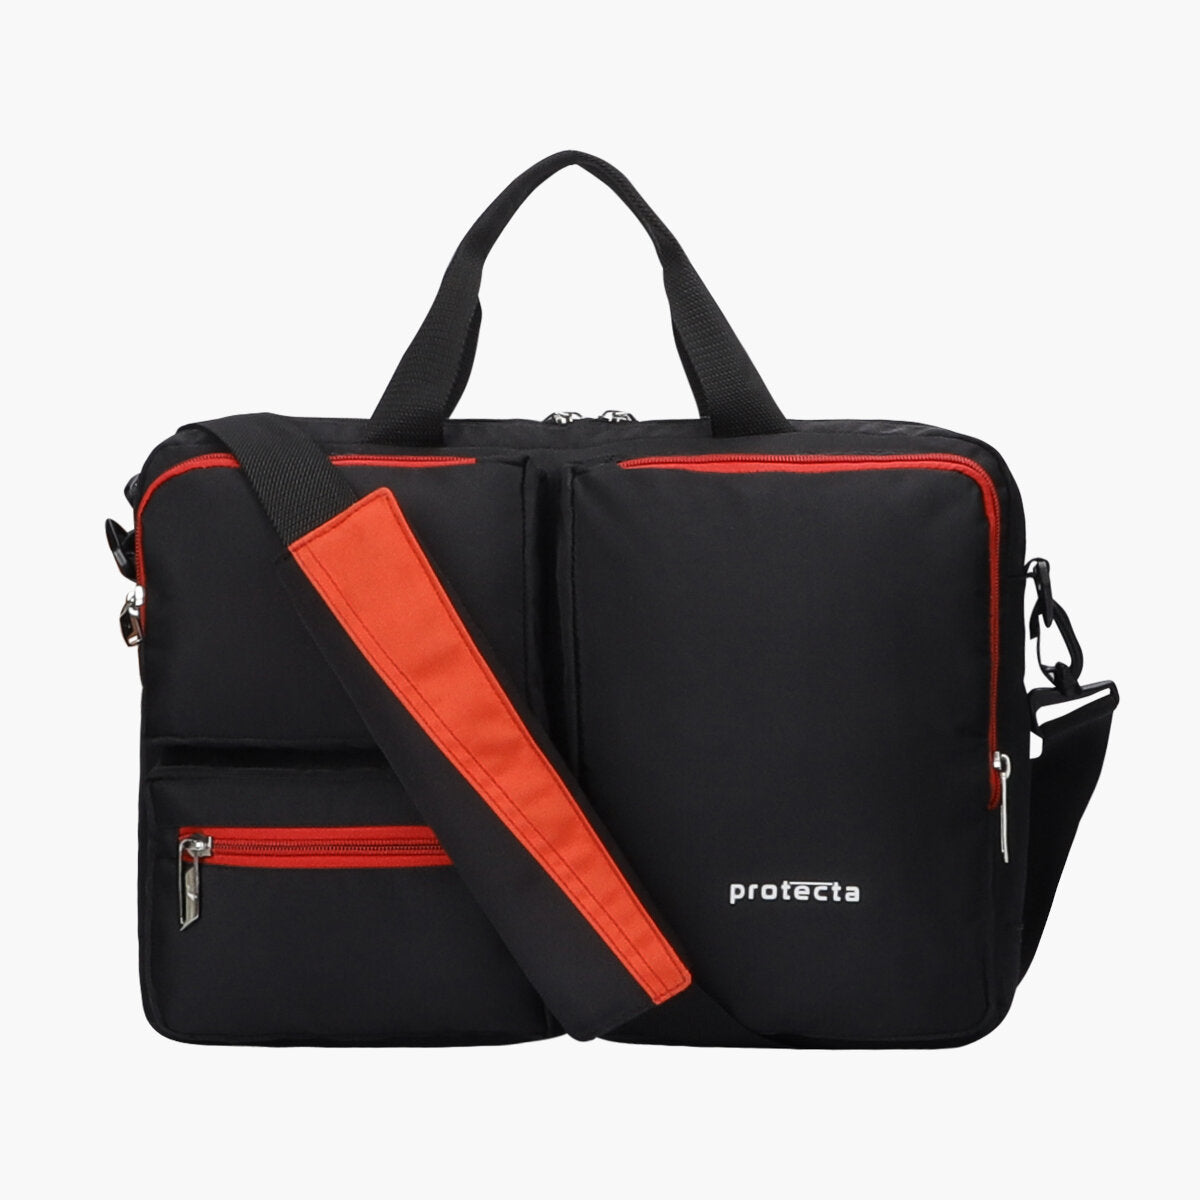 Black Red | Protecta Organised Chaos 2.0 Office Laptop Bag - 5